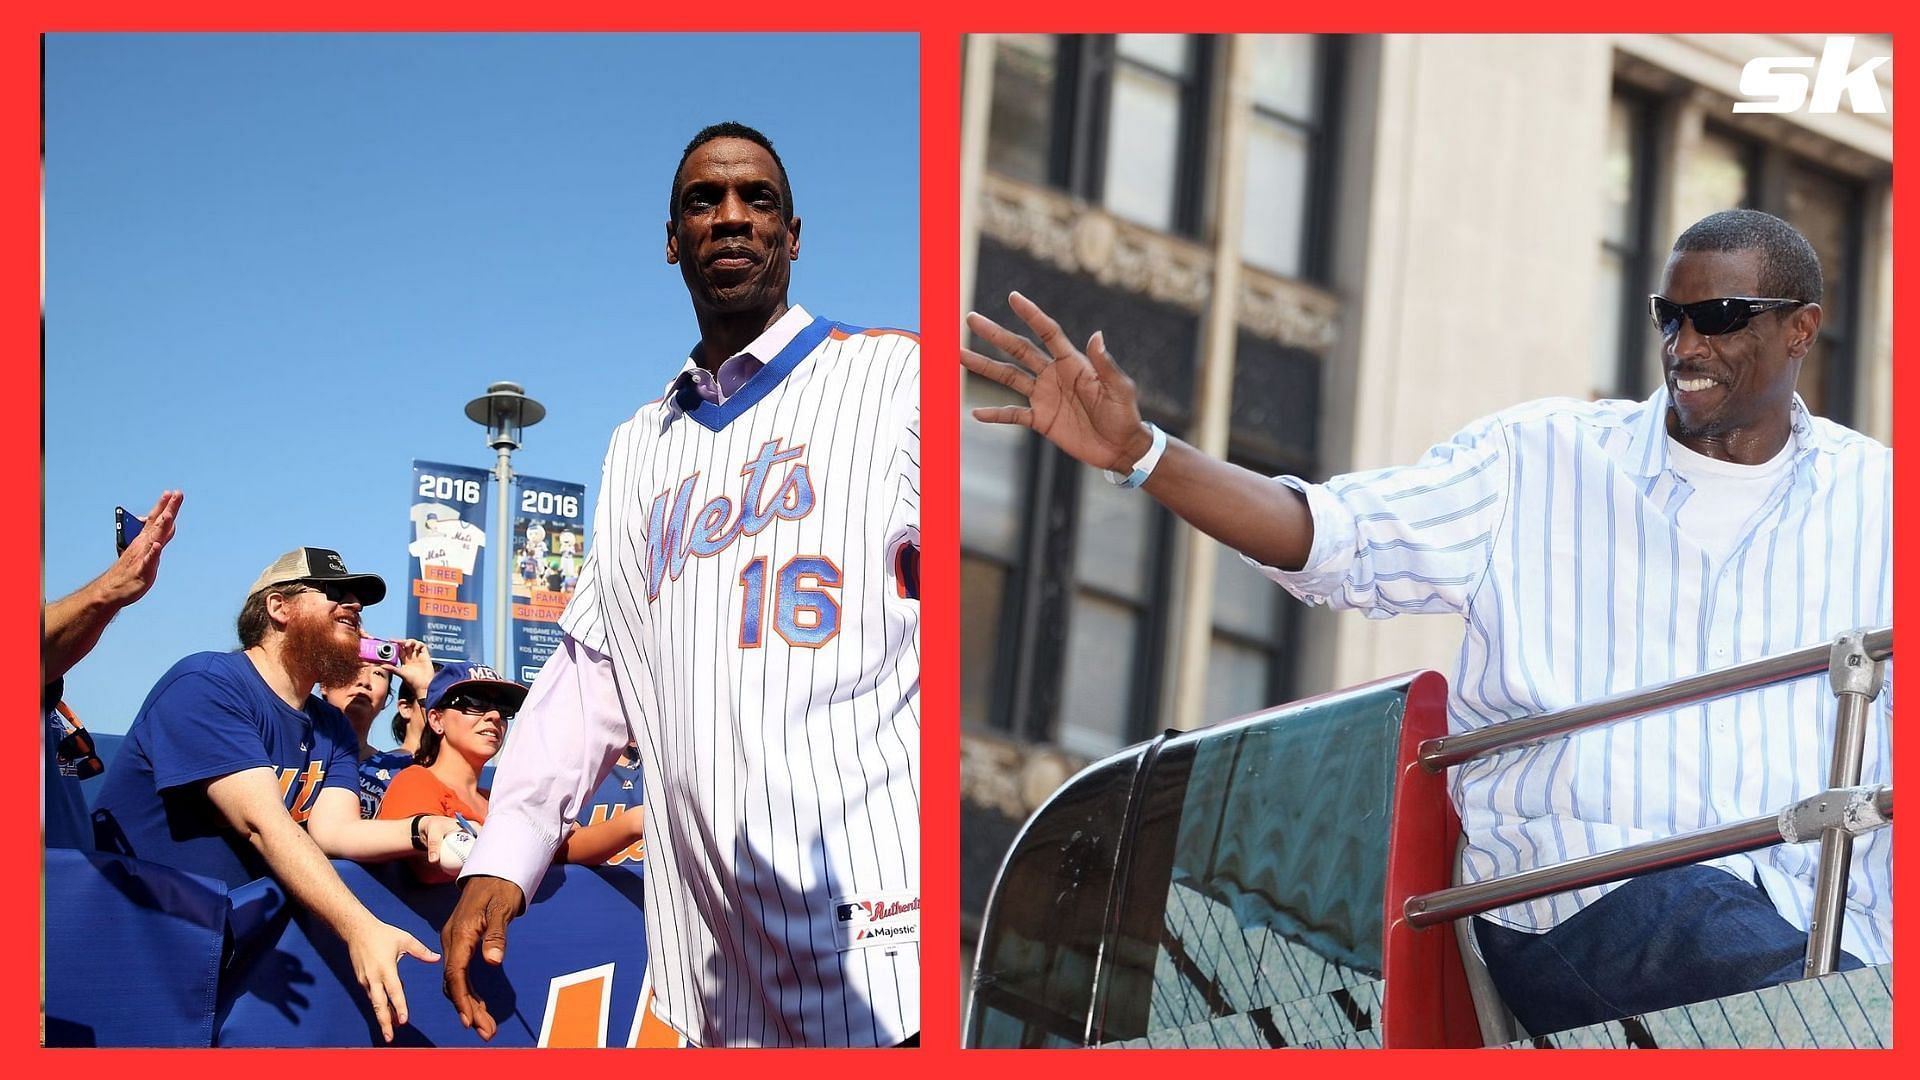 When former Mets star Dwight Gooden reentered rehab at 54 for substance abuse recovery